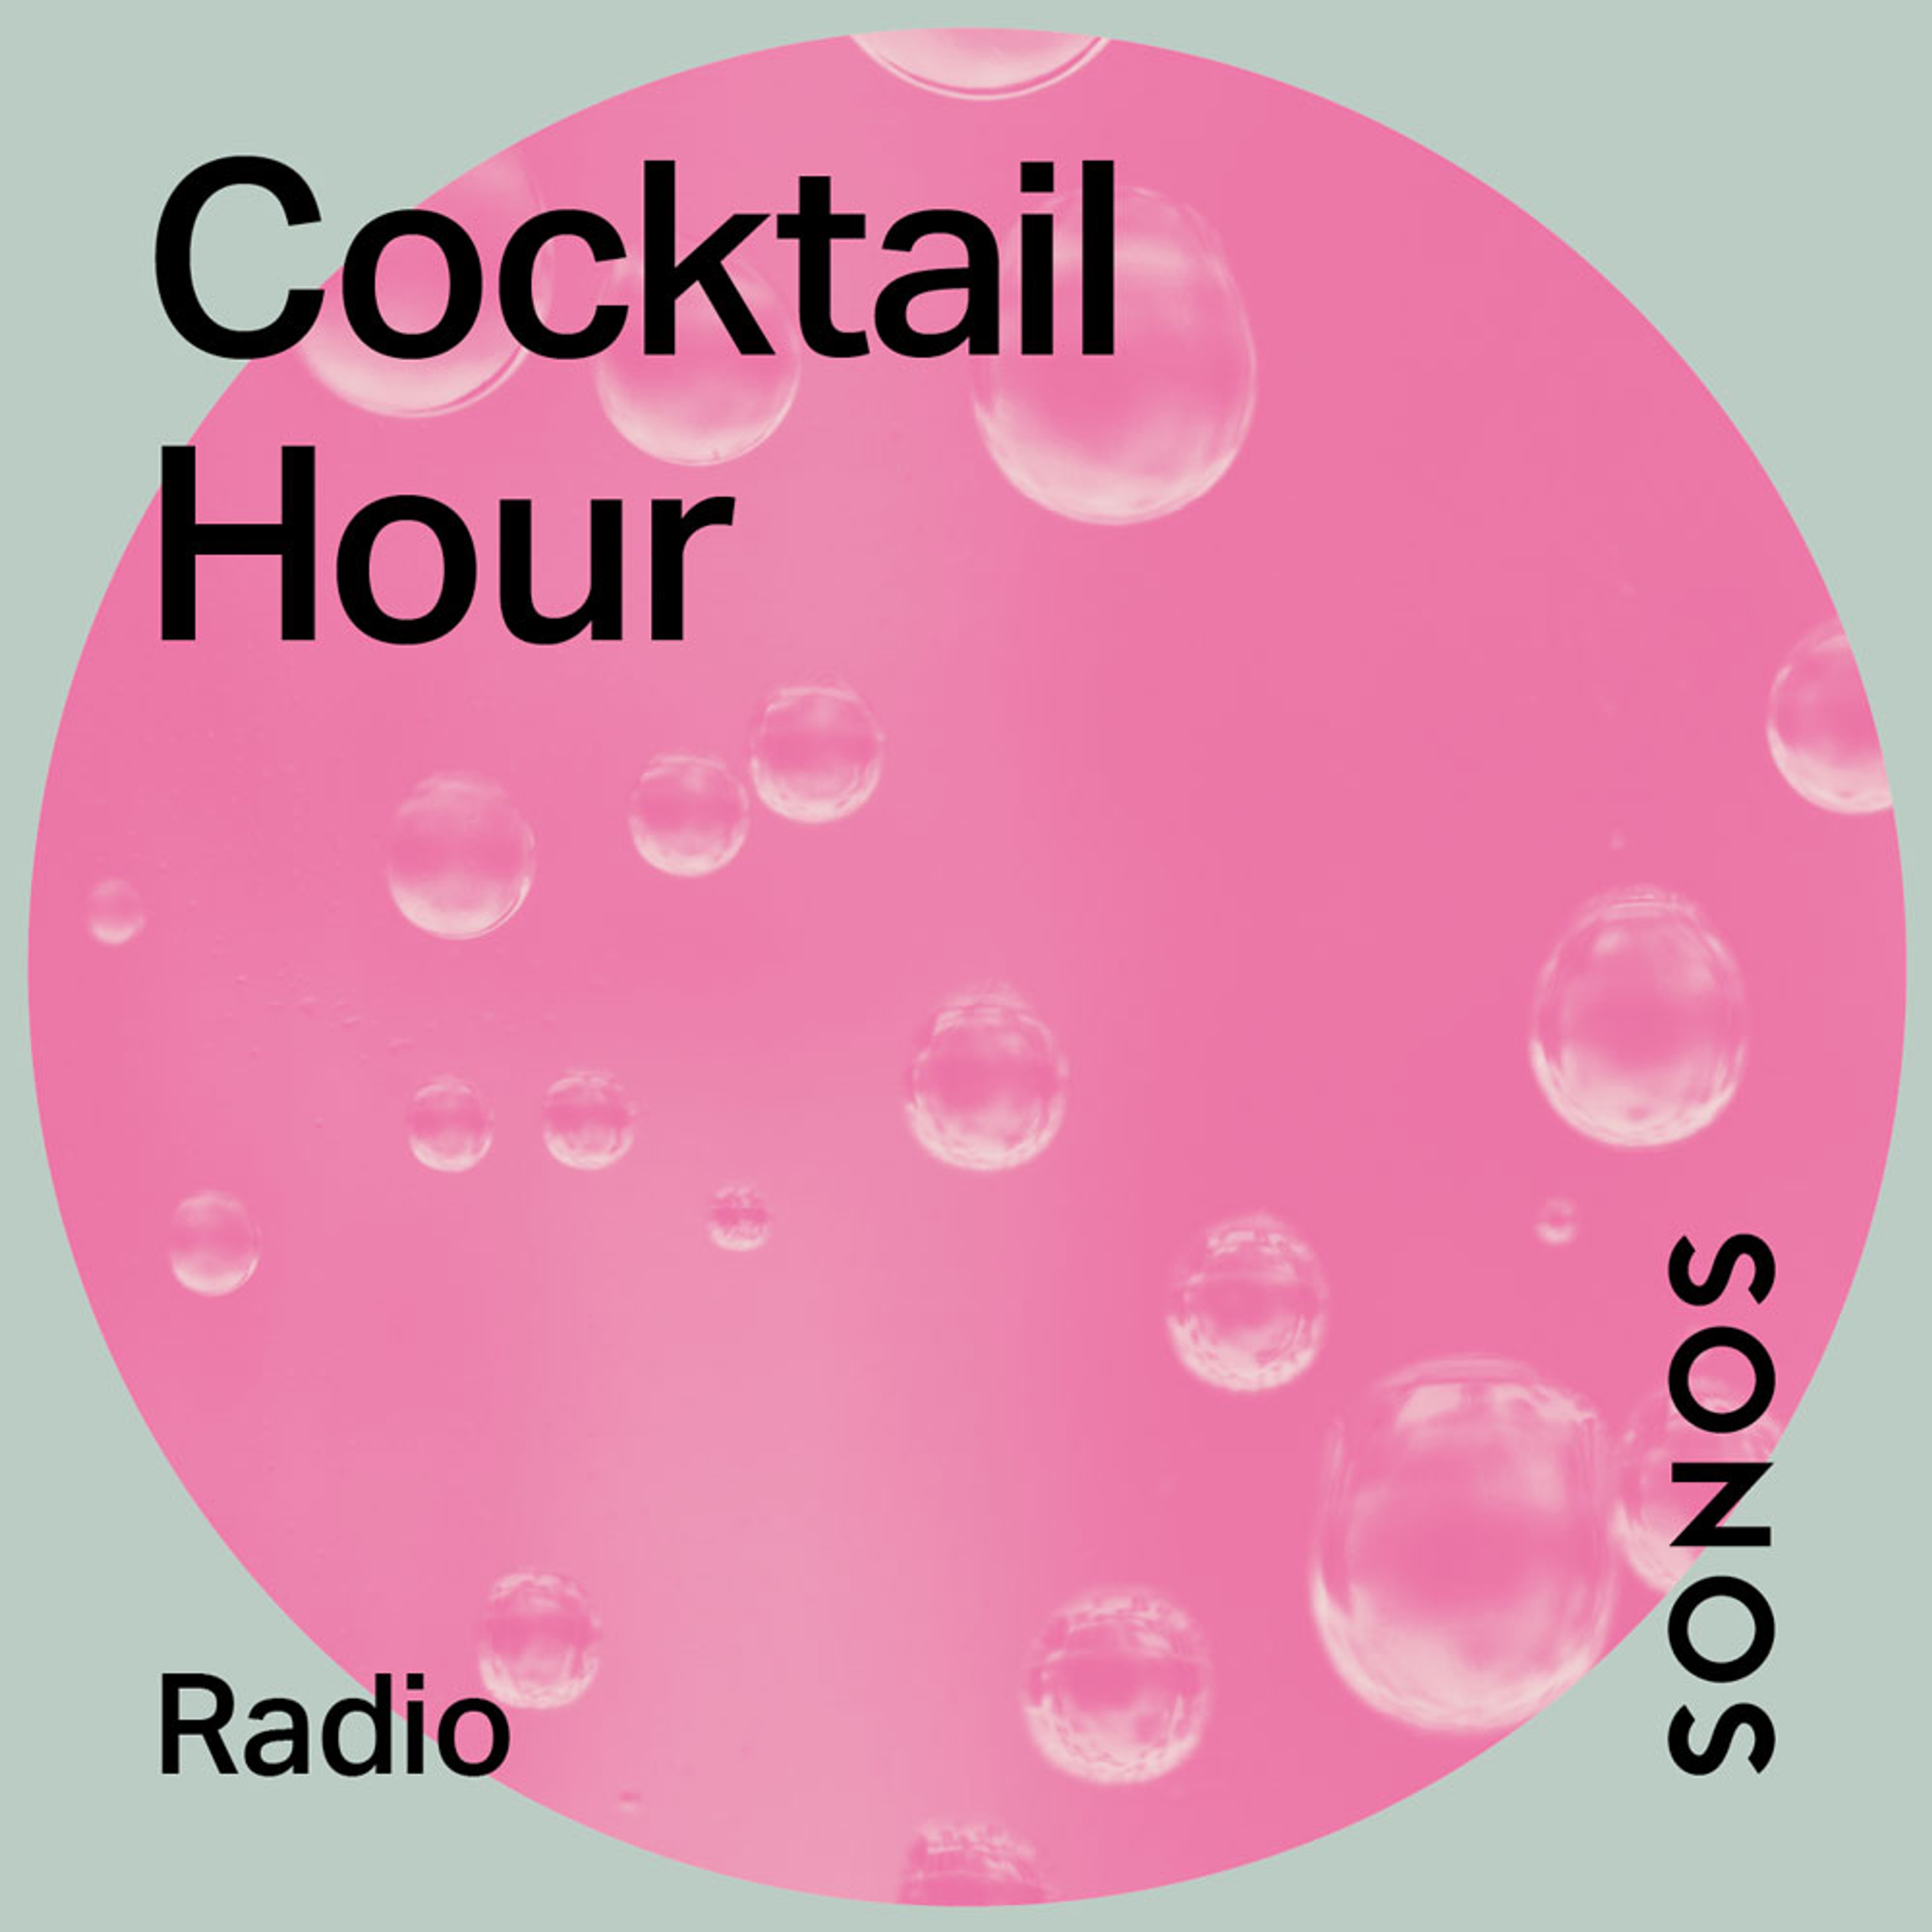 Cocktail Hour radio station cover